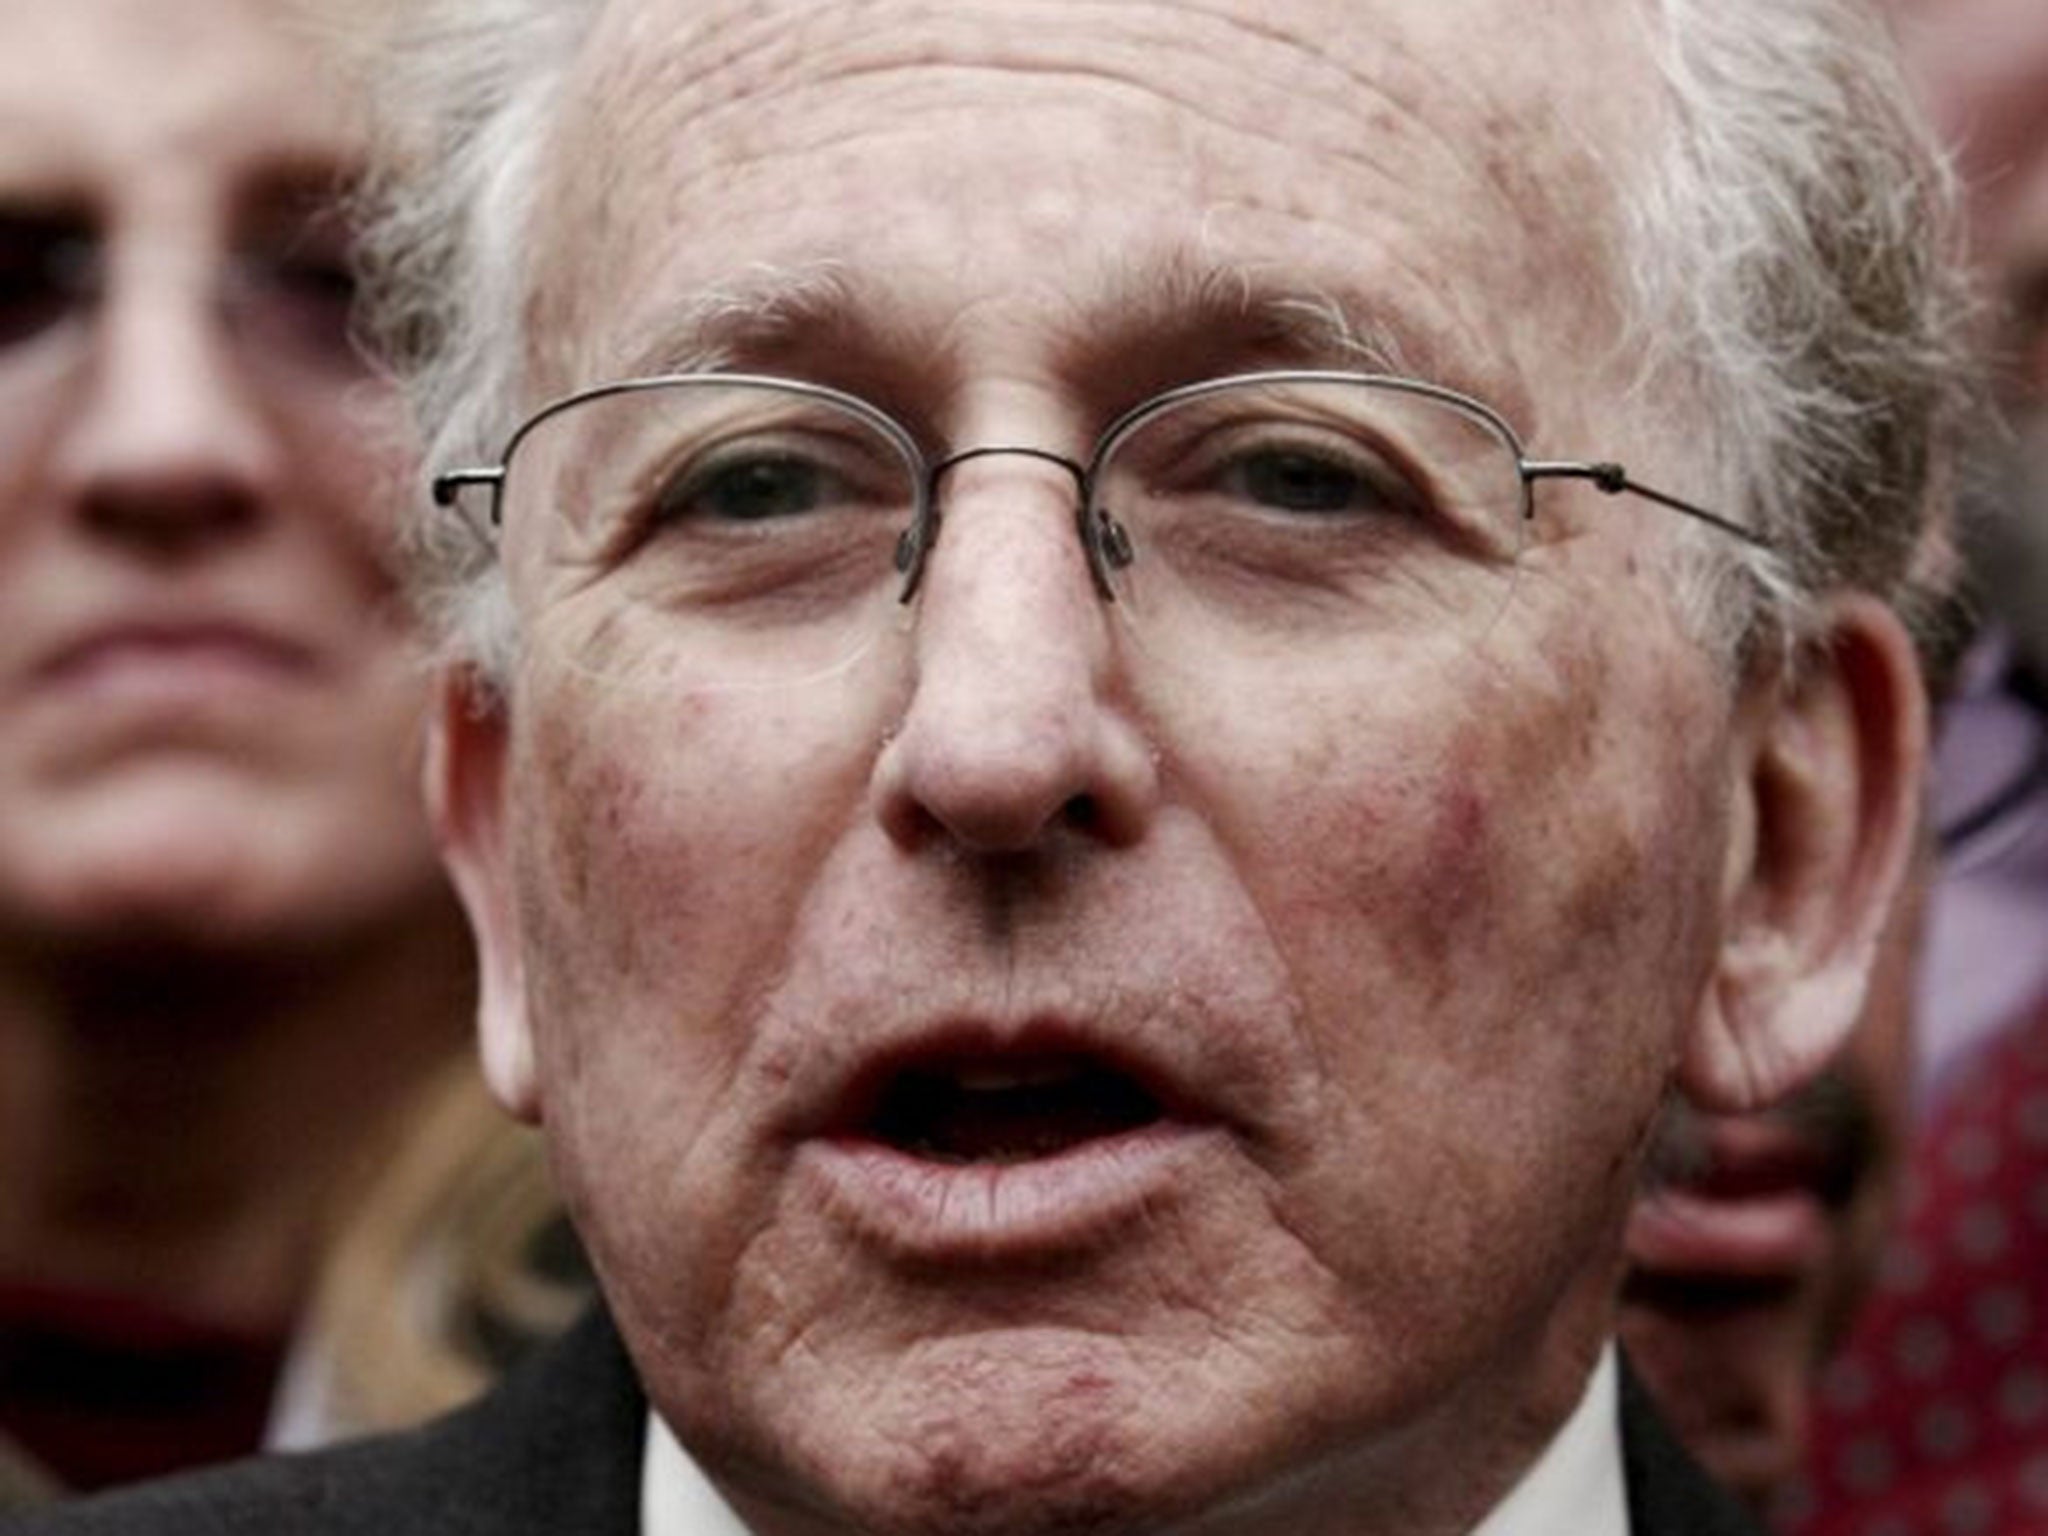 Veteran British Lanbour politician, Lord Greville Janner signed a letter just one week before being called 'too unwell' to stand trial